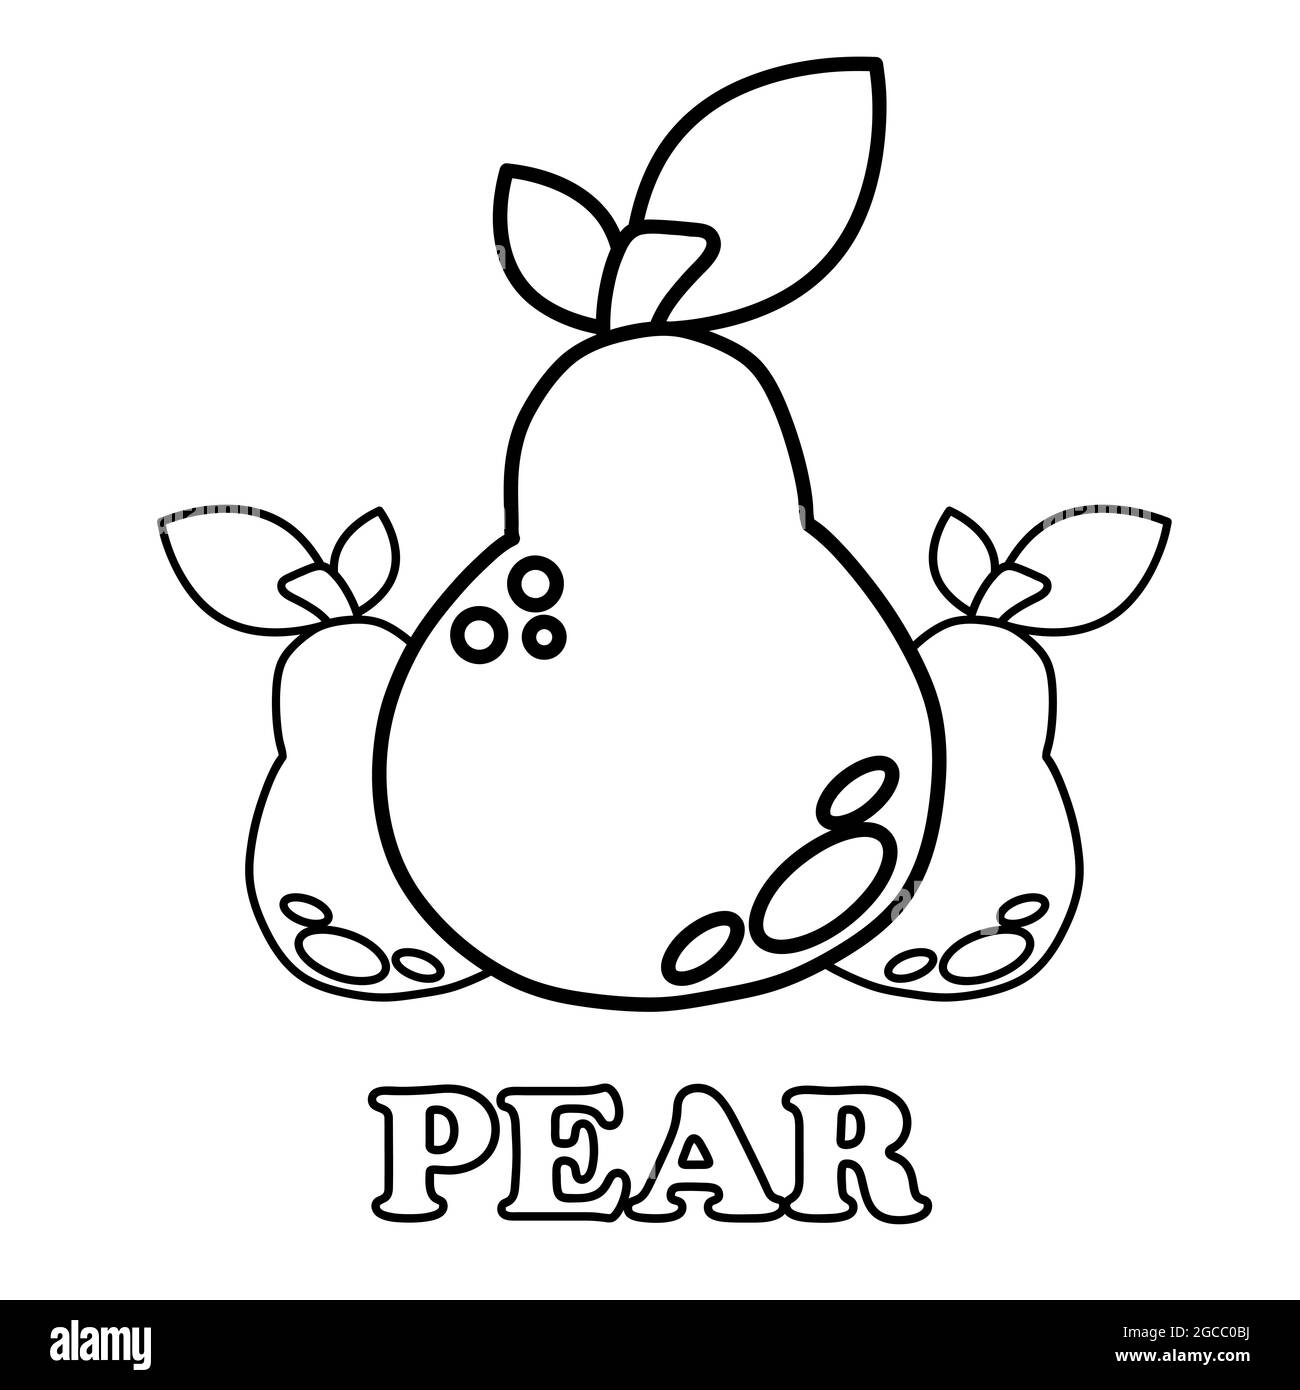 pear fruit coloring page. healthy food coloring page for children on white background Stock Photo